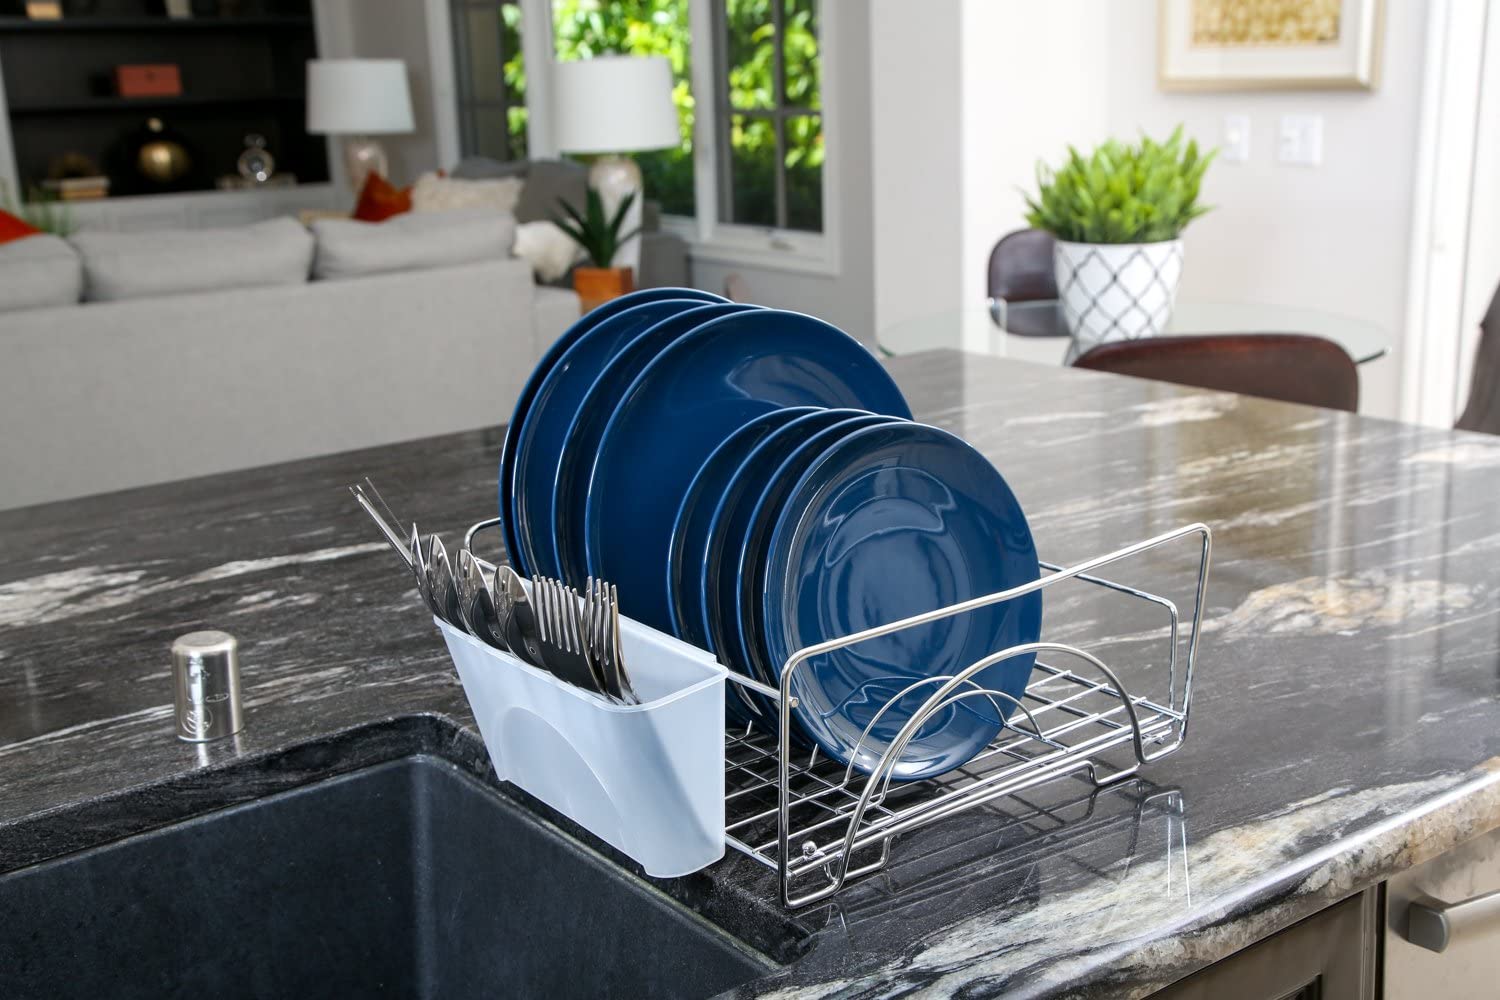 Extendable Dish Drying Rack - Small Dish Rack for Kitchen Counter,  Stainless Steel Dish Drainer with Drainboard and Cutlery Holder, Drying  Dish Rack